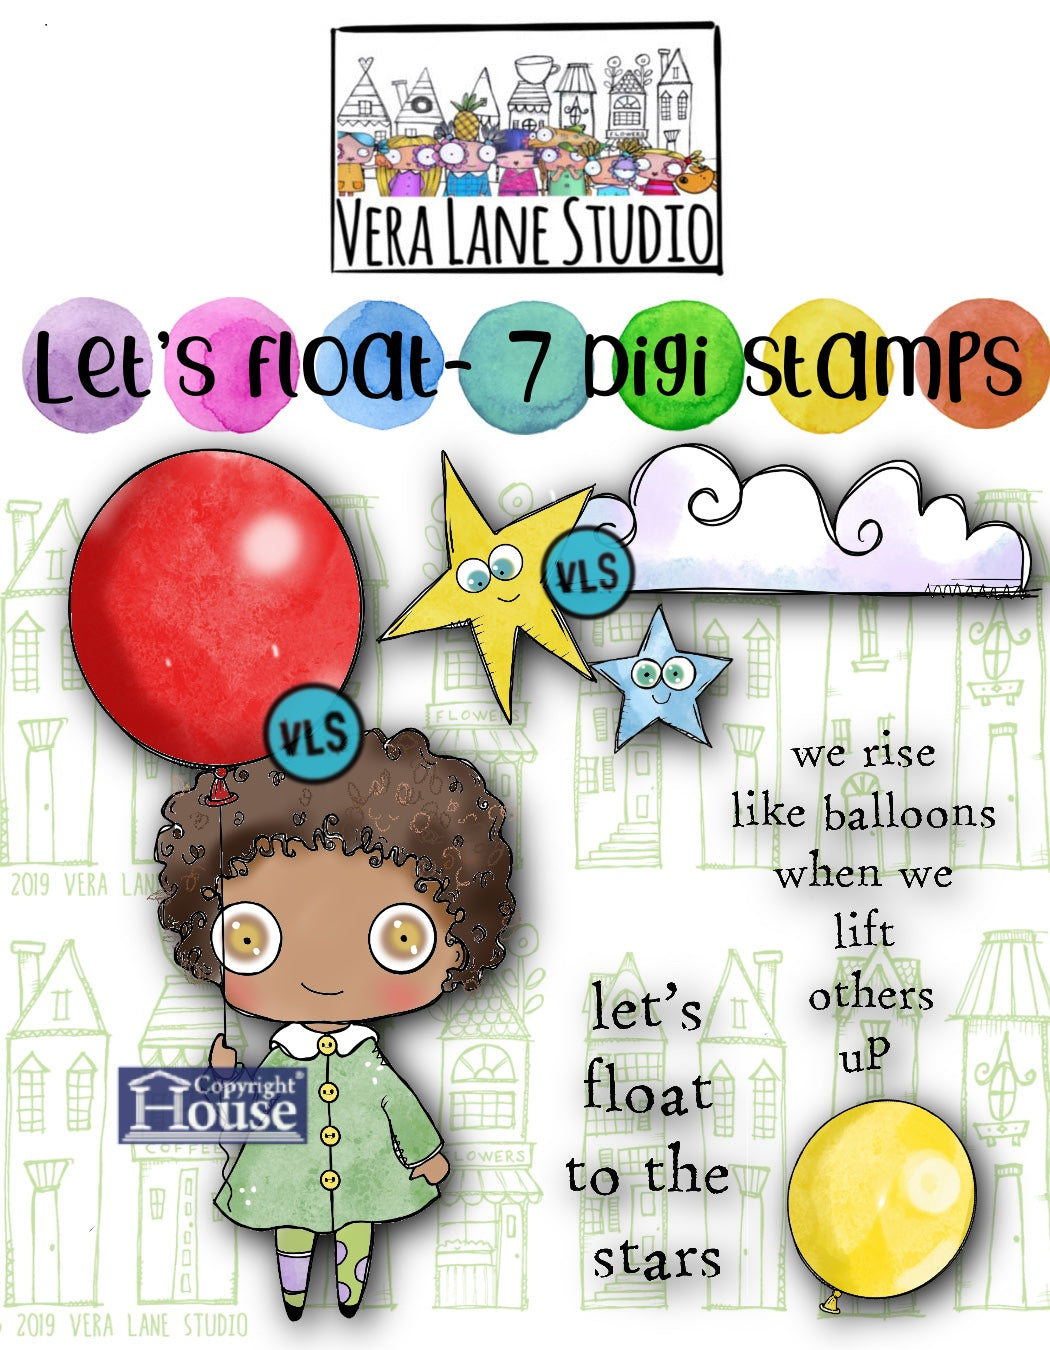 Let’s Float - 7 Digi stamps in jpg and PNG files